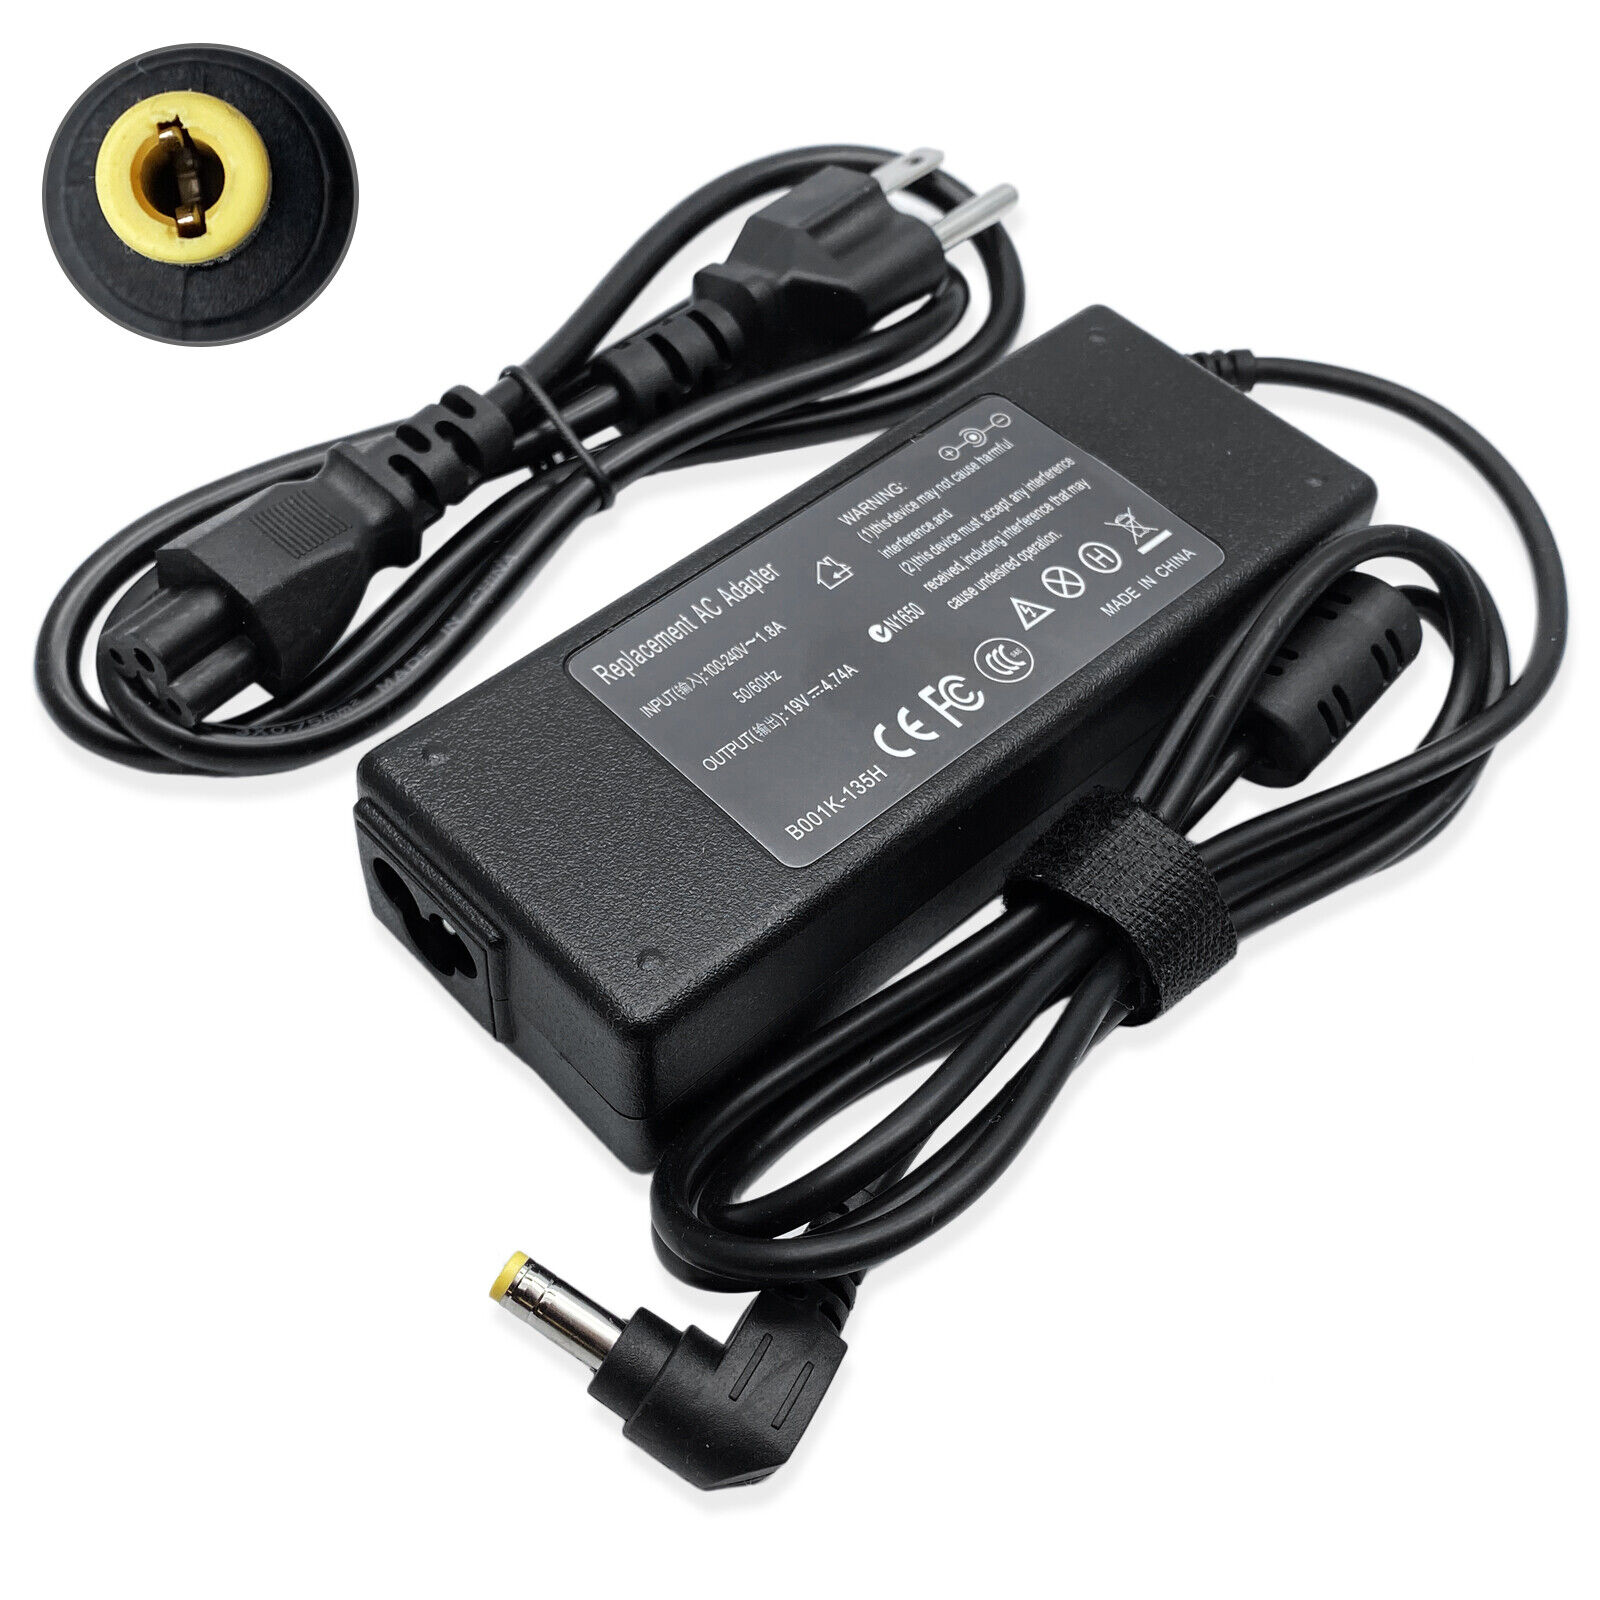 AC Adapter Cord Charger for Toshiba Satellite S55t-A5189 S55t-A5379 S55t-B5233